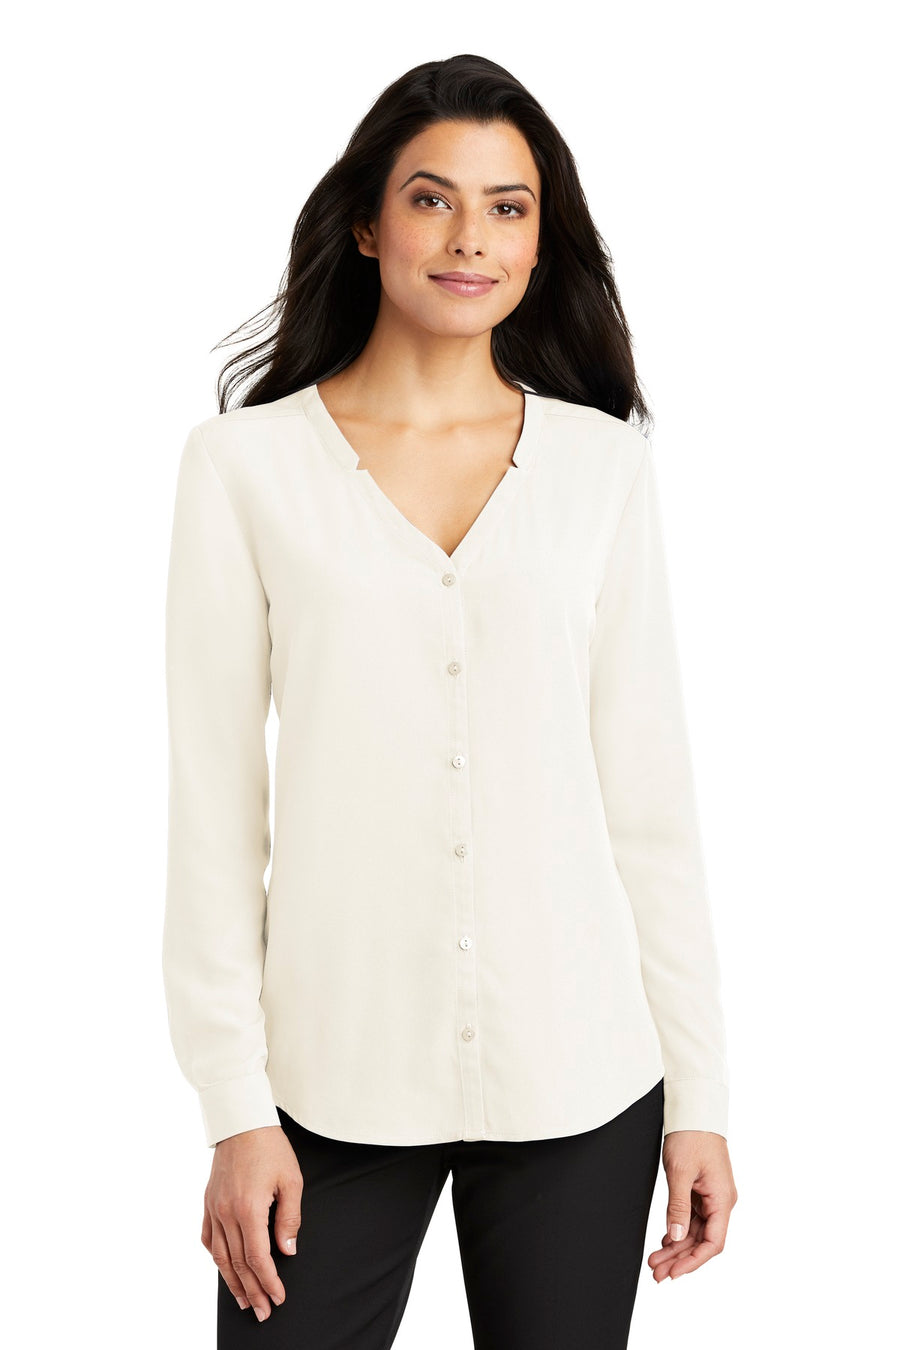 Port Authority Long Sleeve Button-Front Blouse.